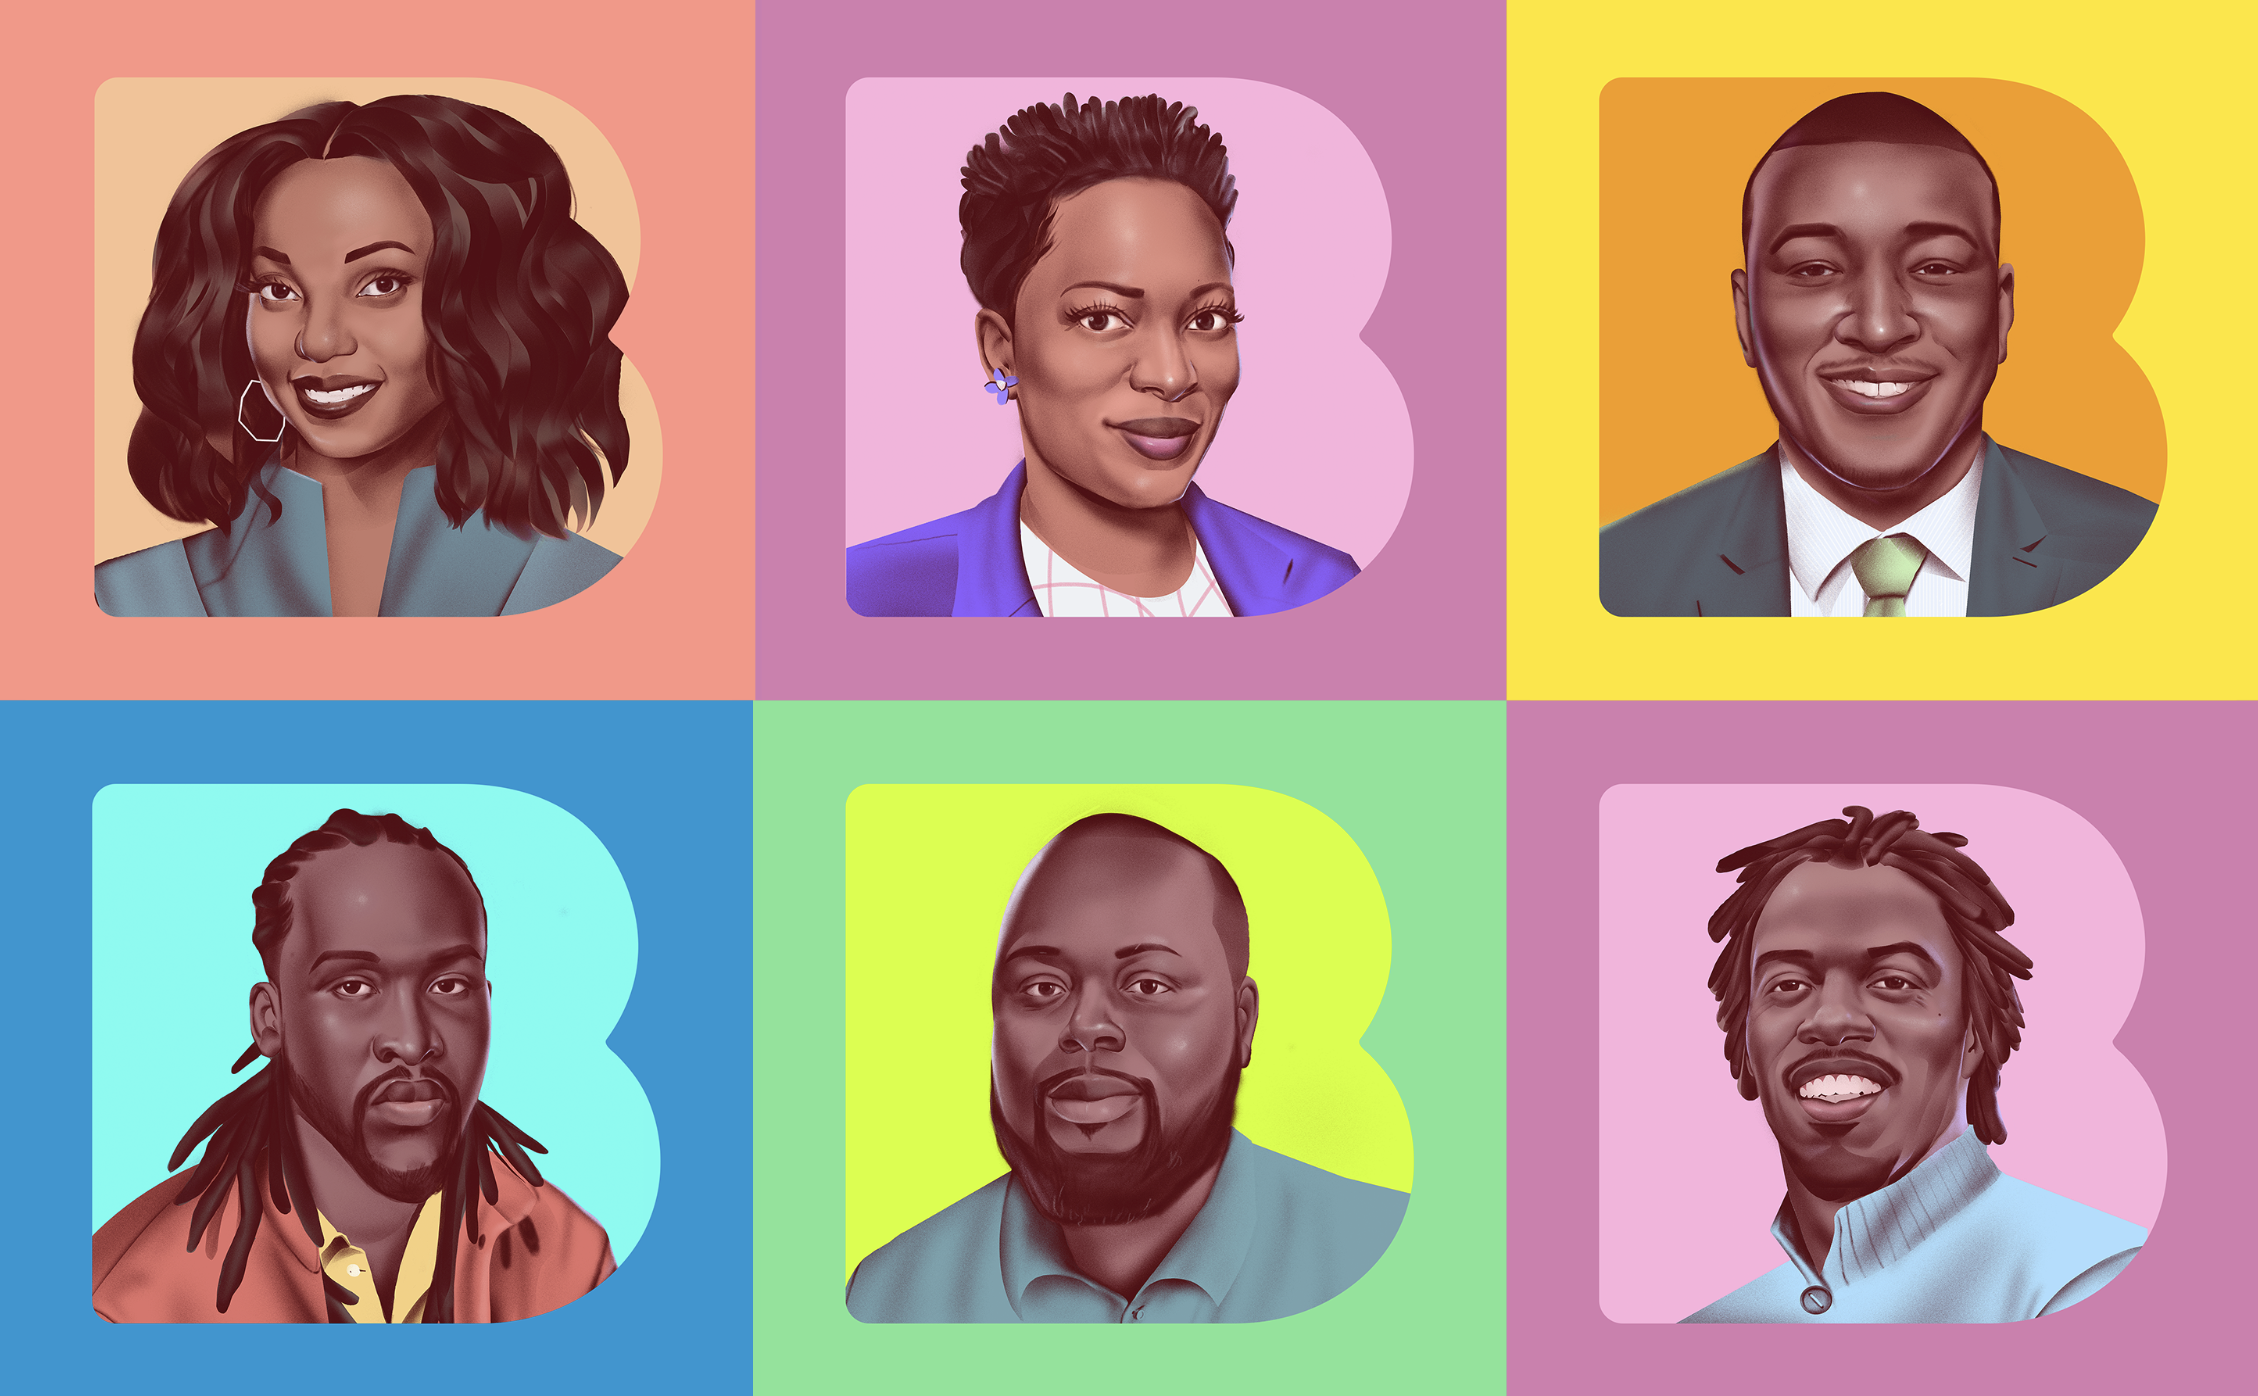 The design of resource Bloom Season reflects the triumphs of Black entrepreneurs